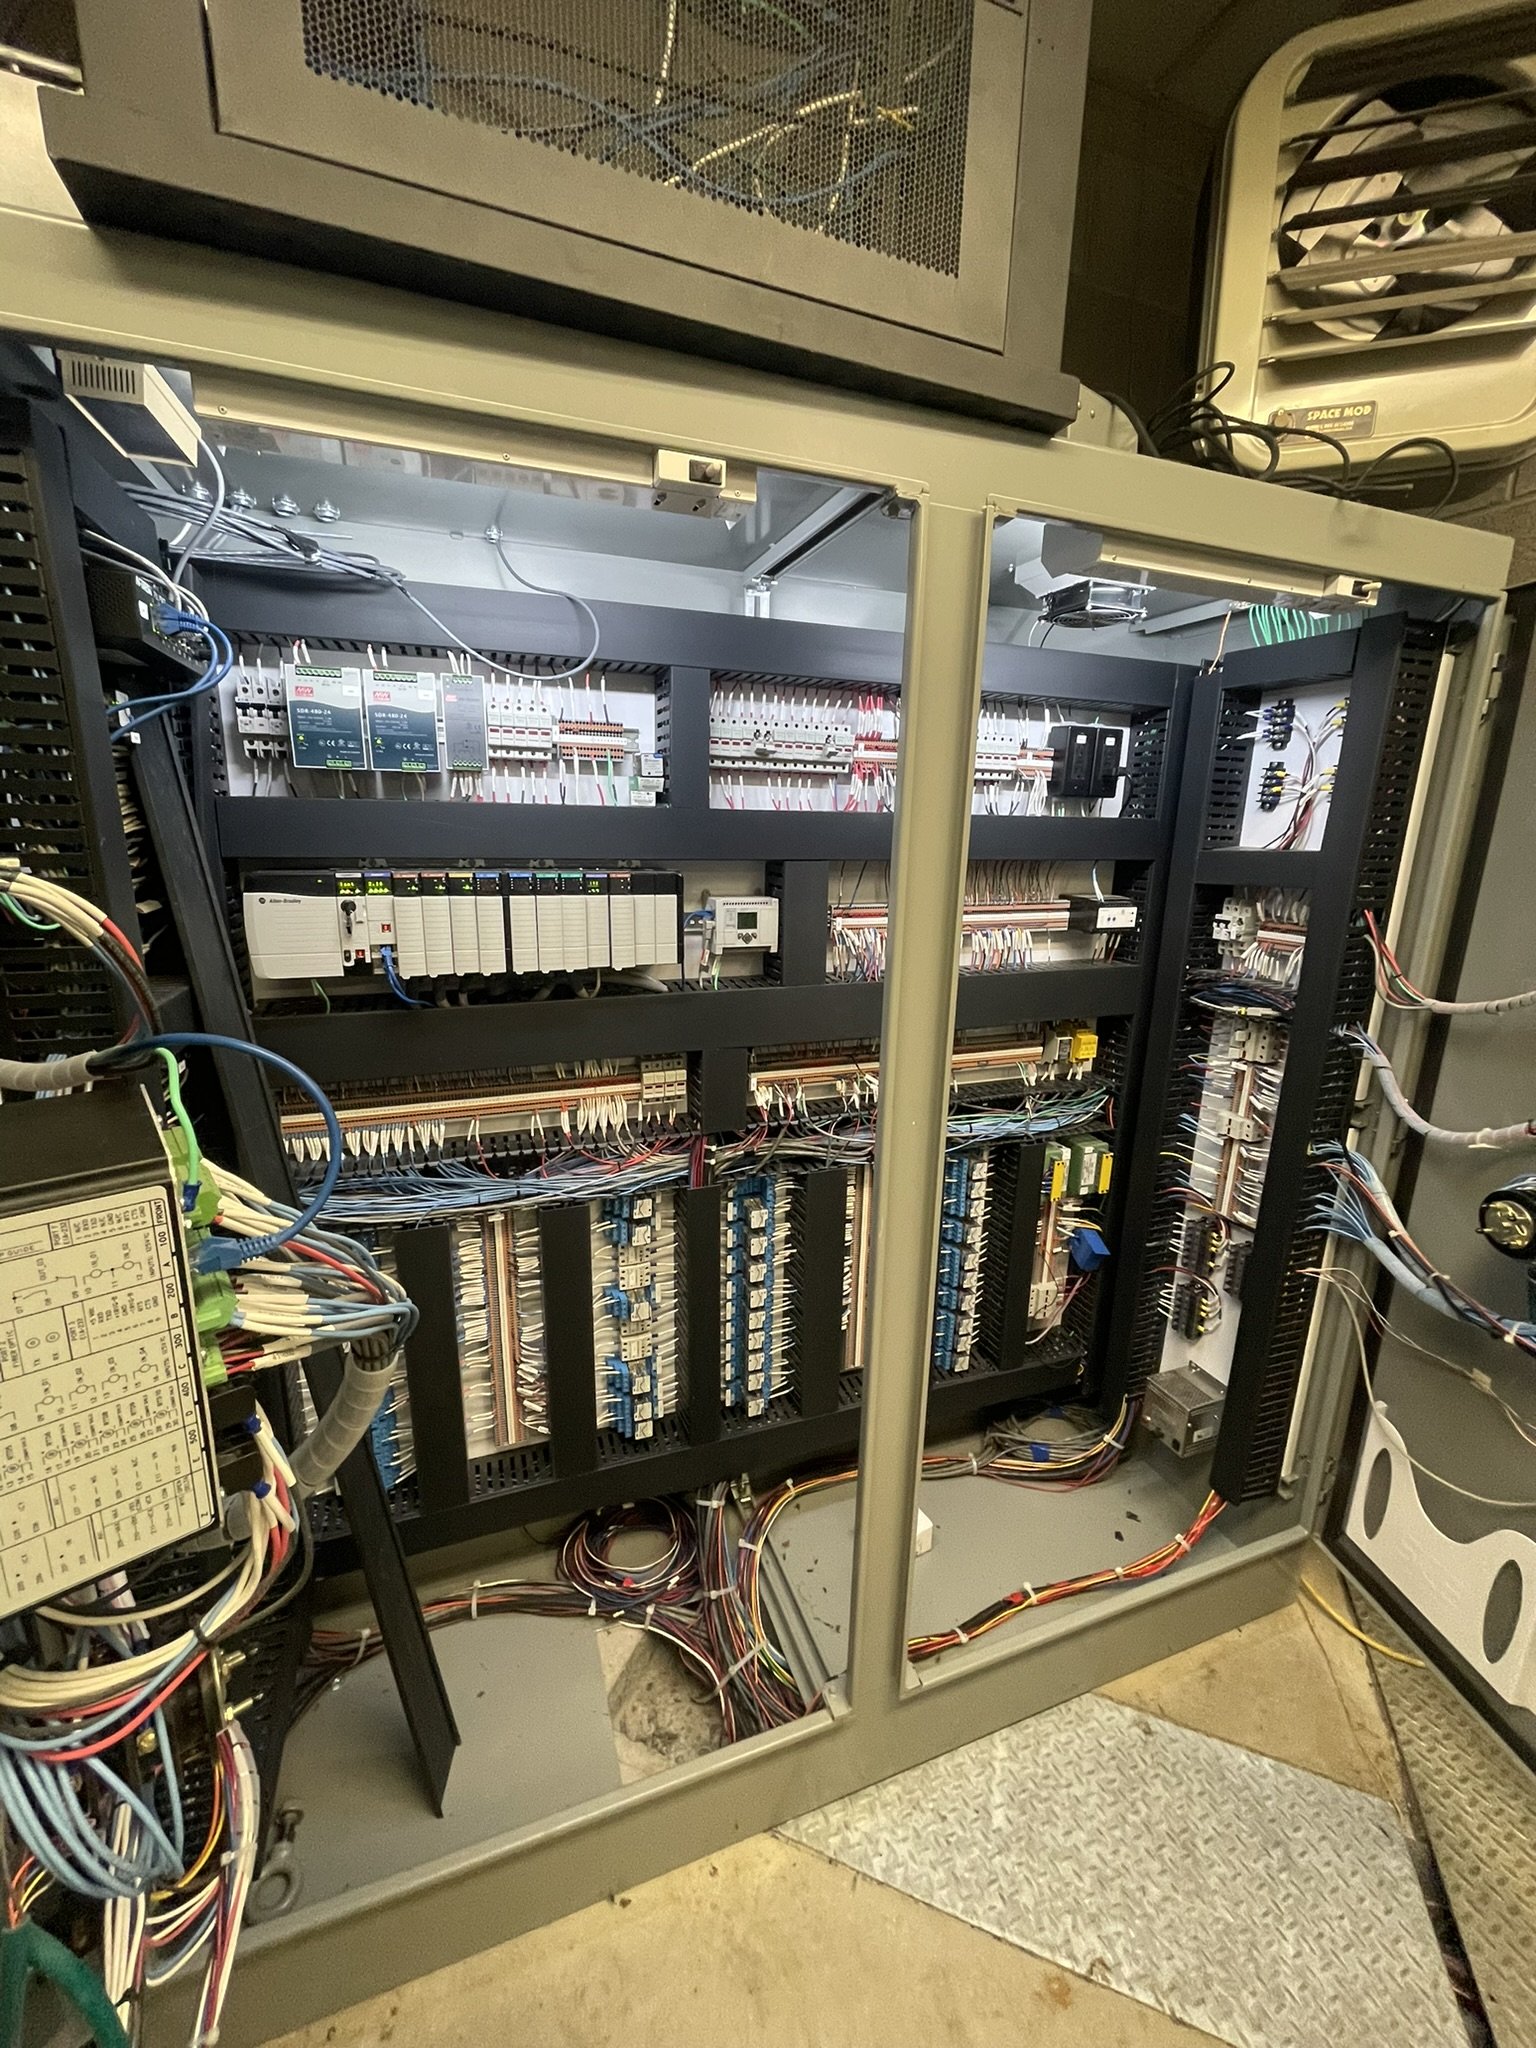  The Computer and electrical wiring required for the new “smart” version of the power generation plant at FID’s Peter’s Drive plant. A local electrician was able to wire this in one day! 